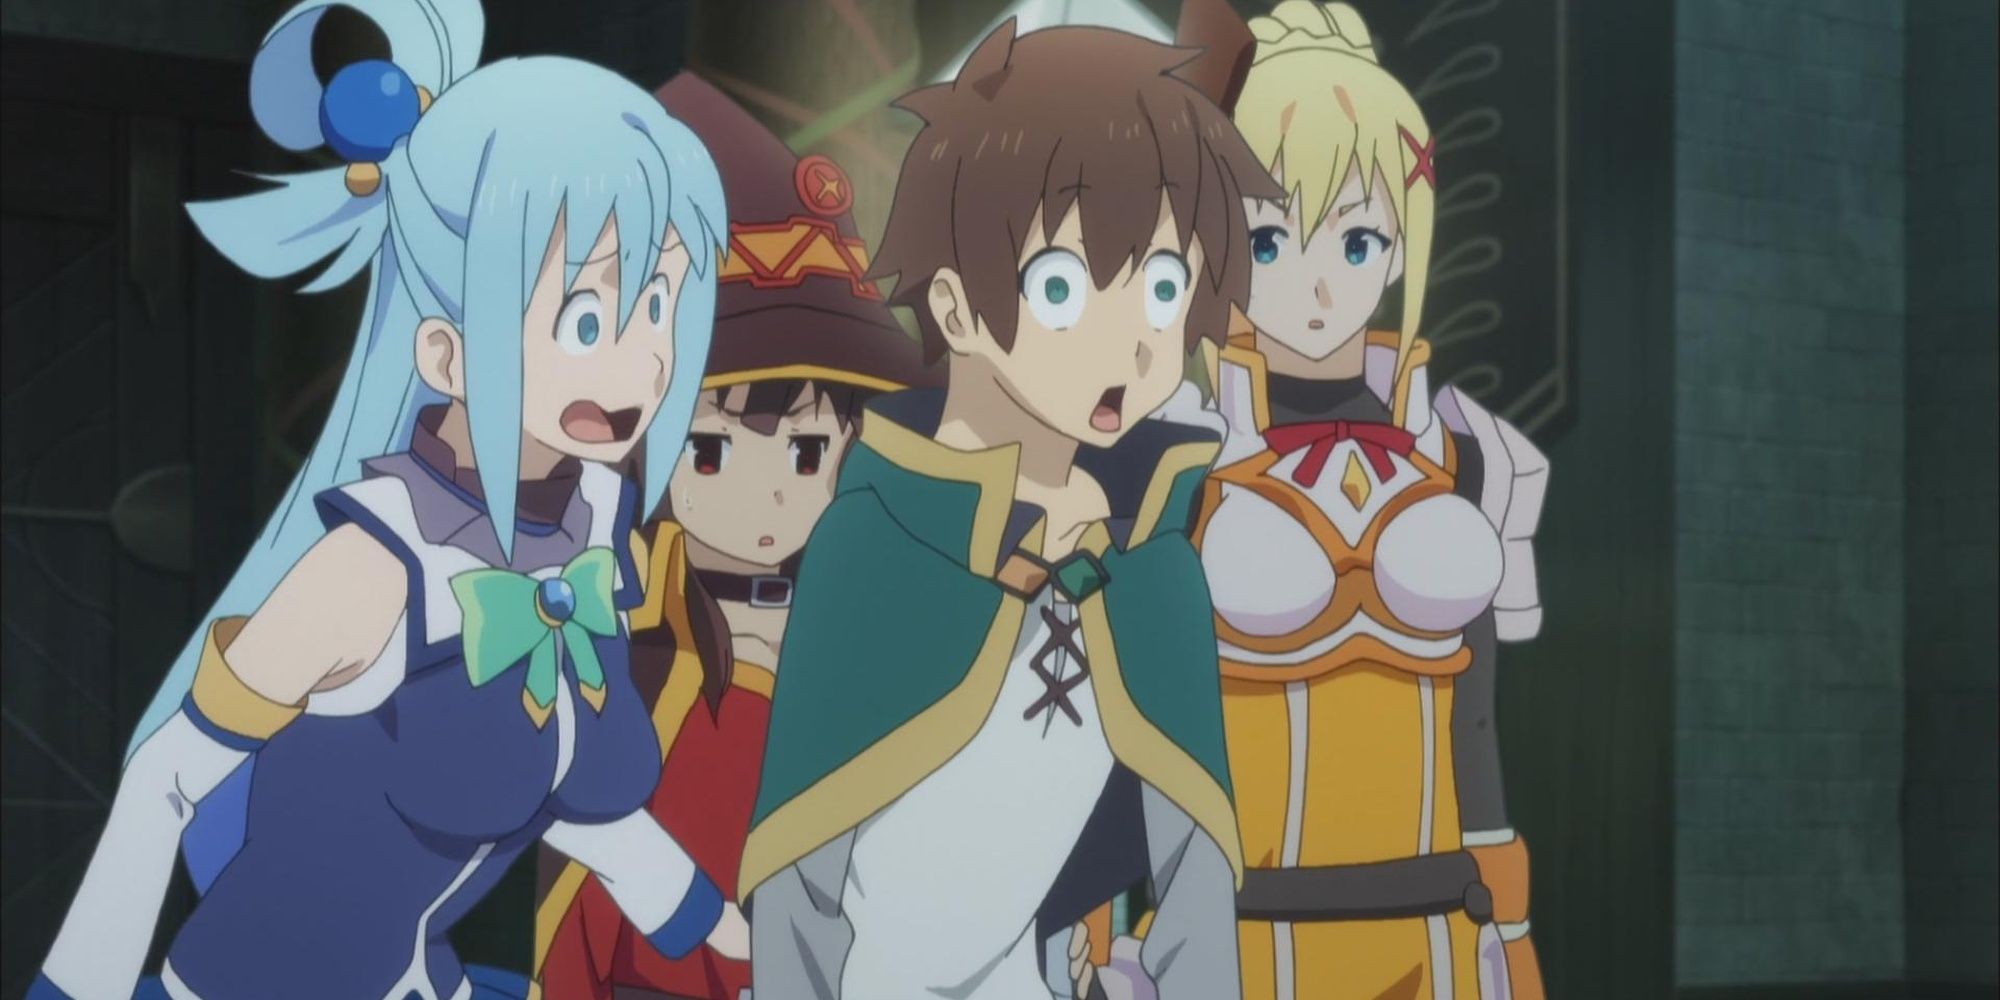 Kazuma looking dumbstruck with his friends by his side.